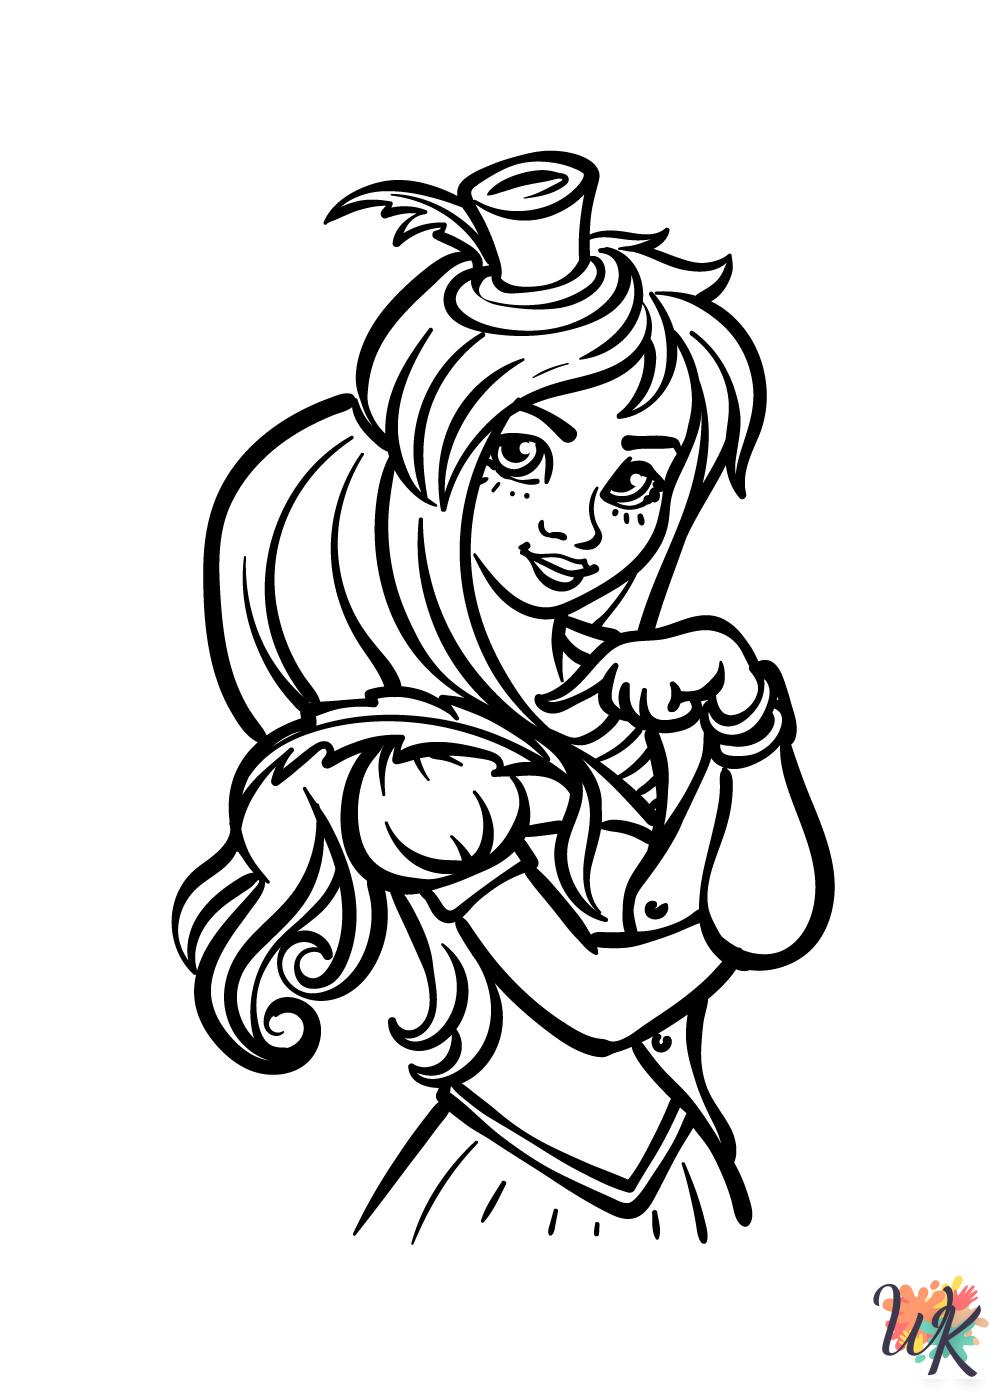 Descendants 2 coloring pages for adults easy